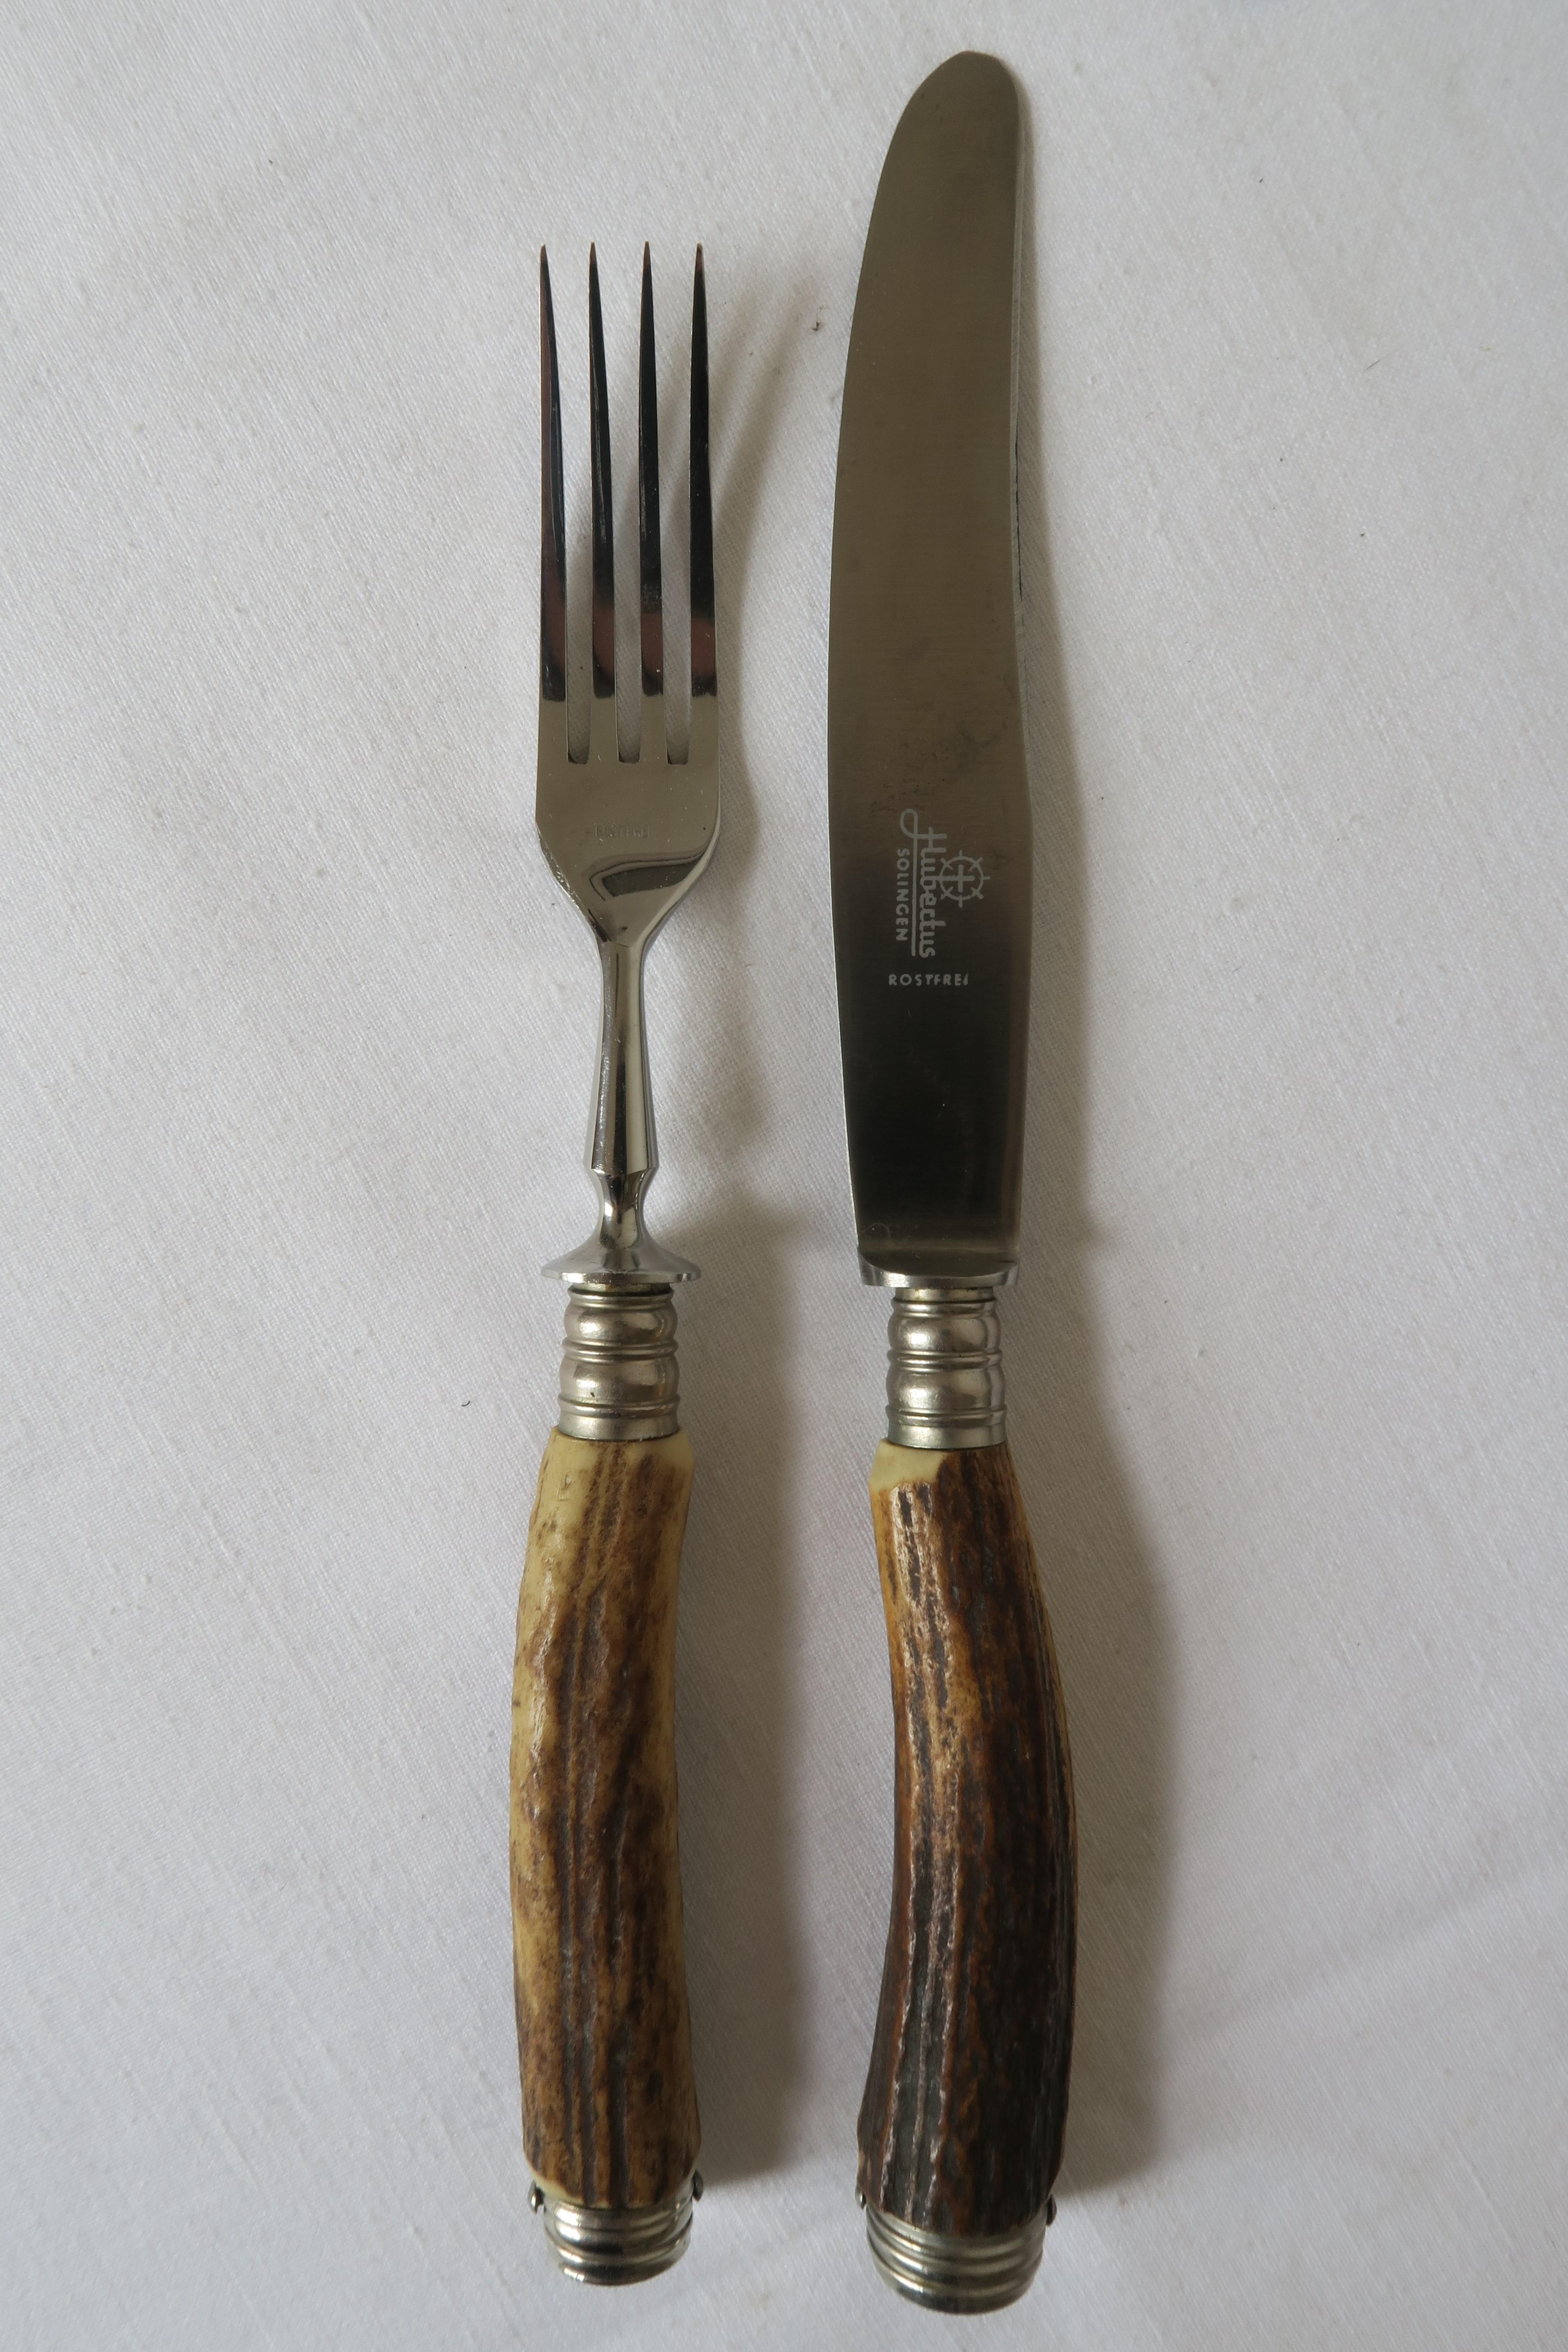 On sale is a set of tableware for six persons. In addition to the set you will receive a pair of large meat cutlery in the same design. All cutlery is crafted in the same style from stainless steel and stag horns as handles. The natural horn has